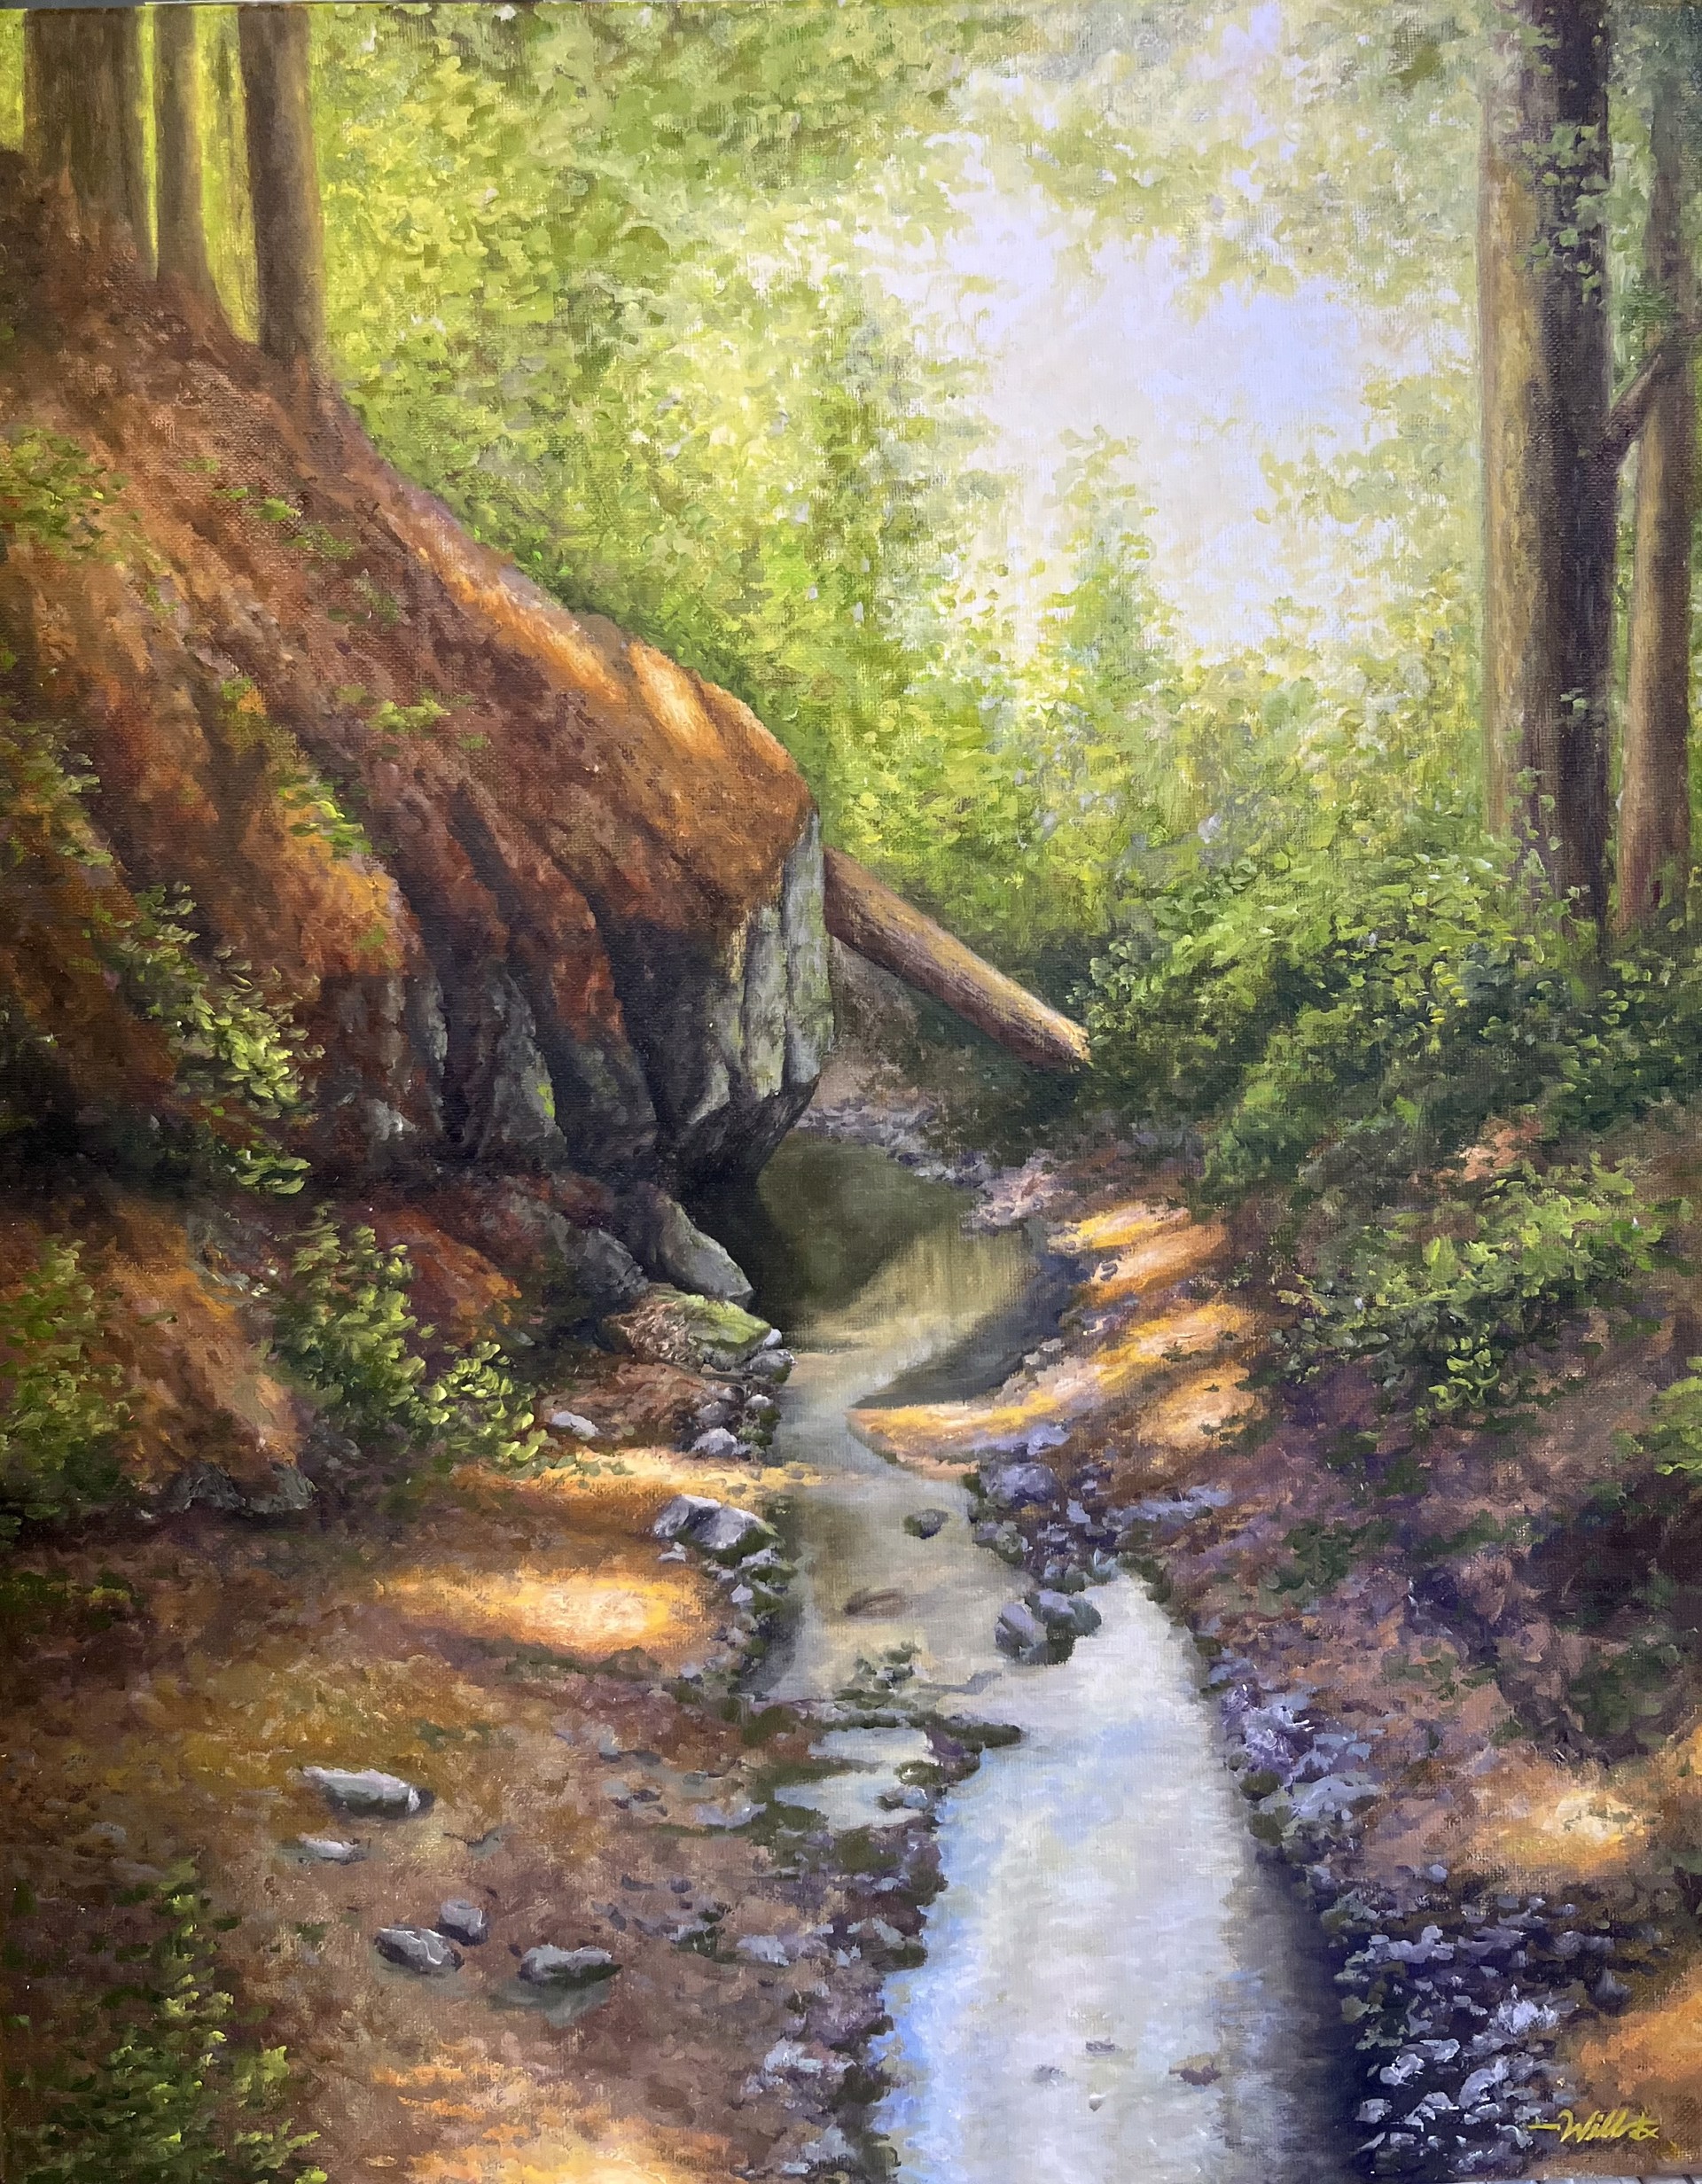 Muir Woods by William Lipscomb